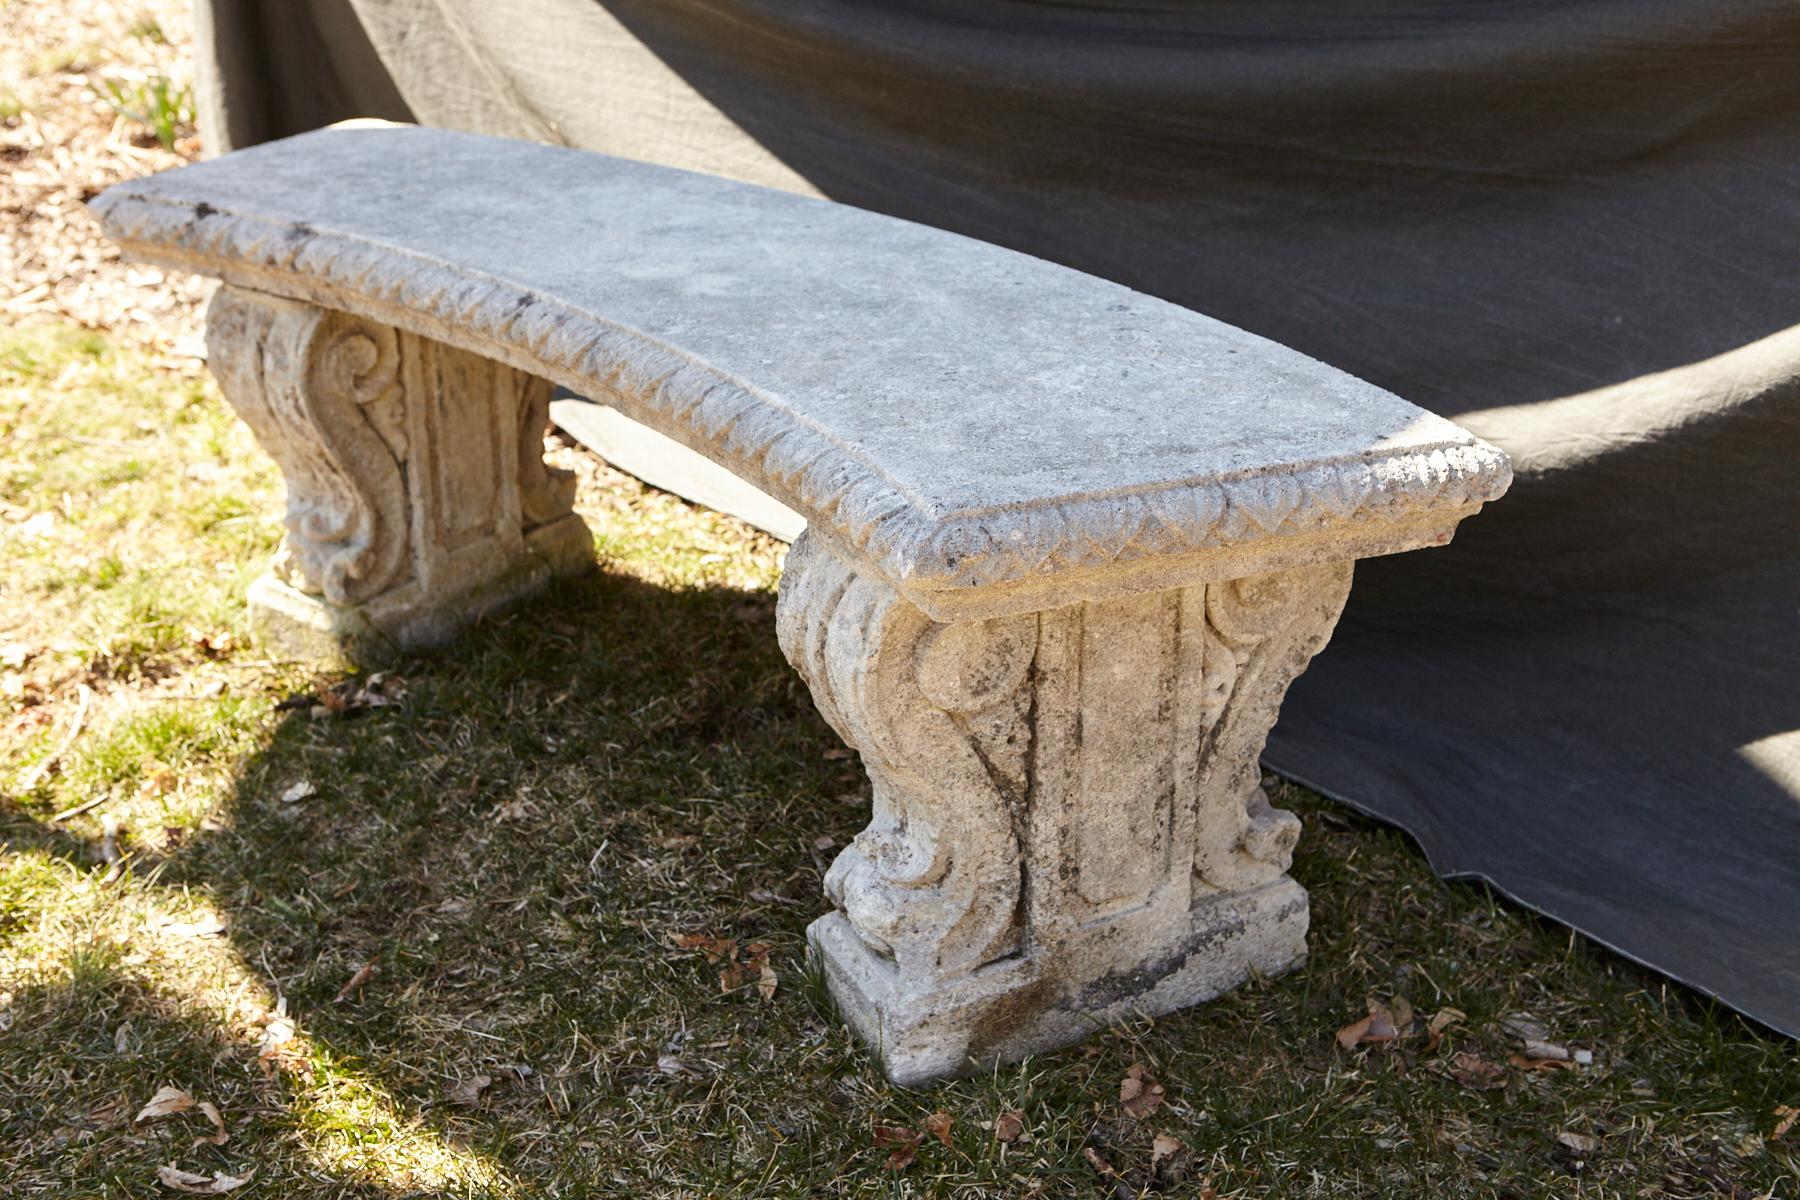 Curved cast stone bench with an ornamental carved band of alternating concave and convex sections around the flat seat, reminiscent of flower petals, mounted on carved legs with carved double sided scrolled acanthus leaves.
The bench has a very nice